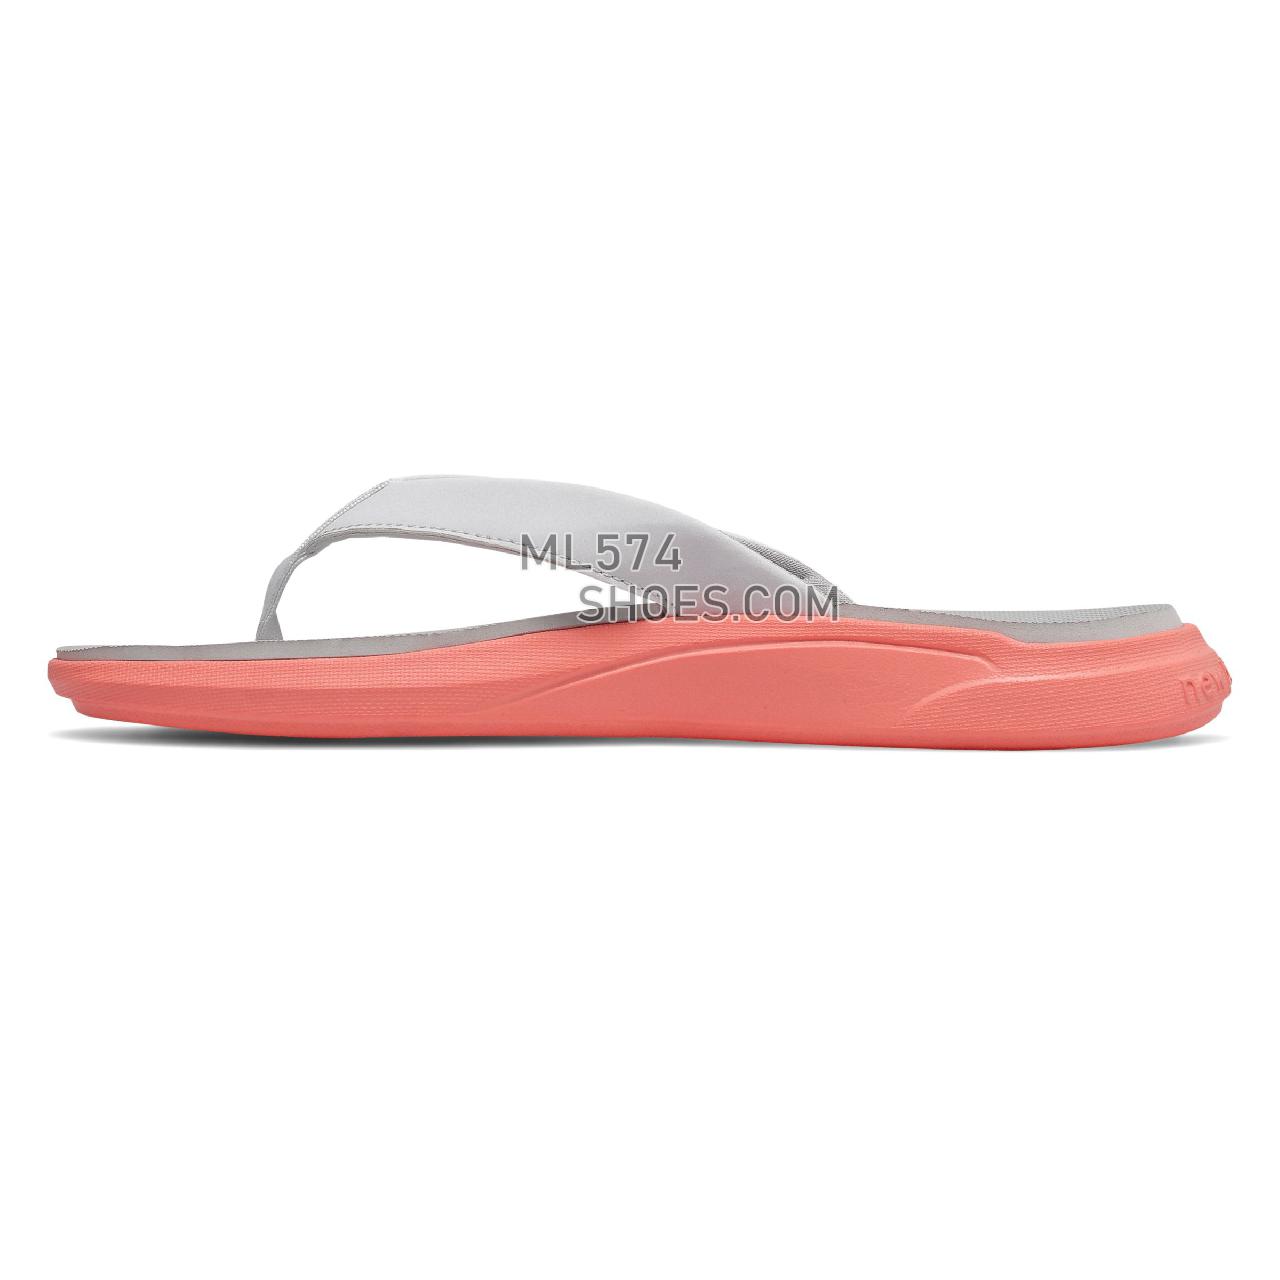 New Balance 340 - Women's Flip Flops - Munsell White with Ginger Pink and Silver Metallic - SWT340GP